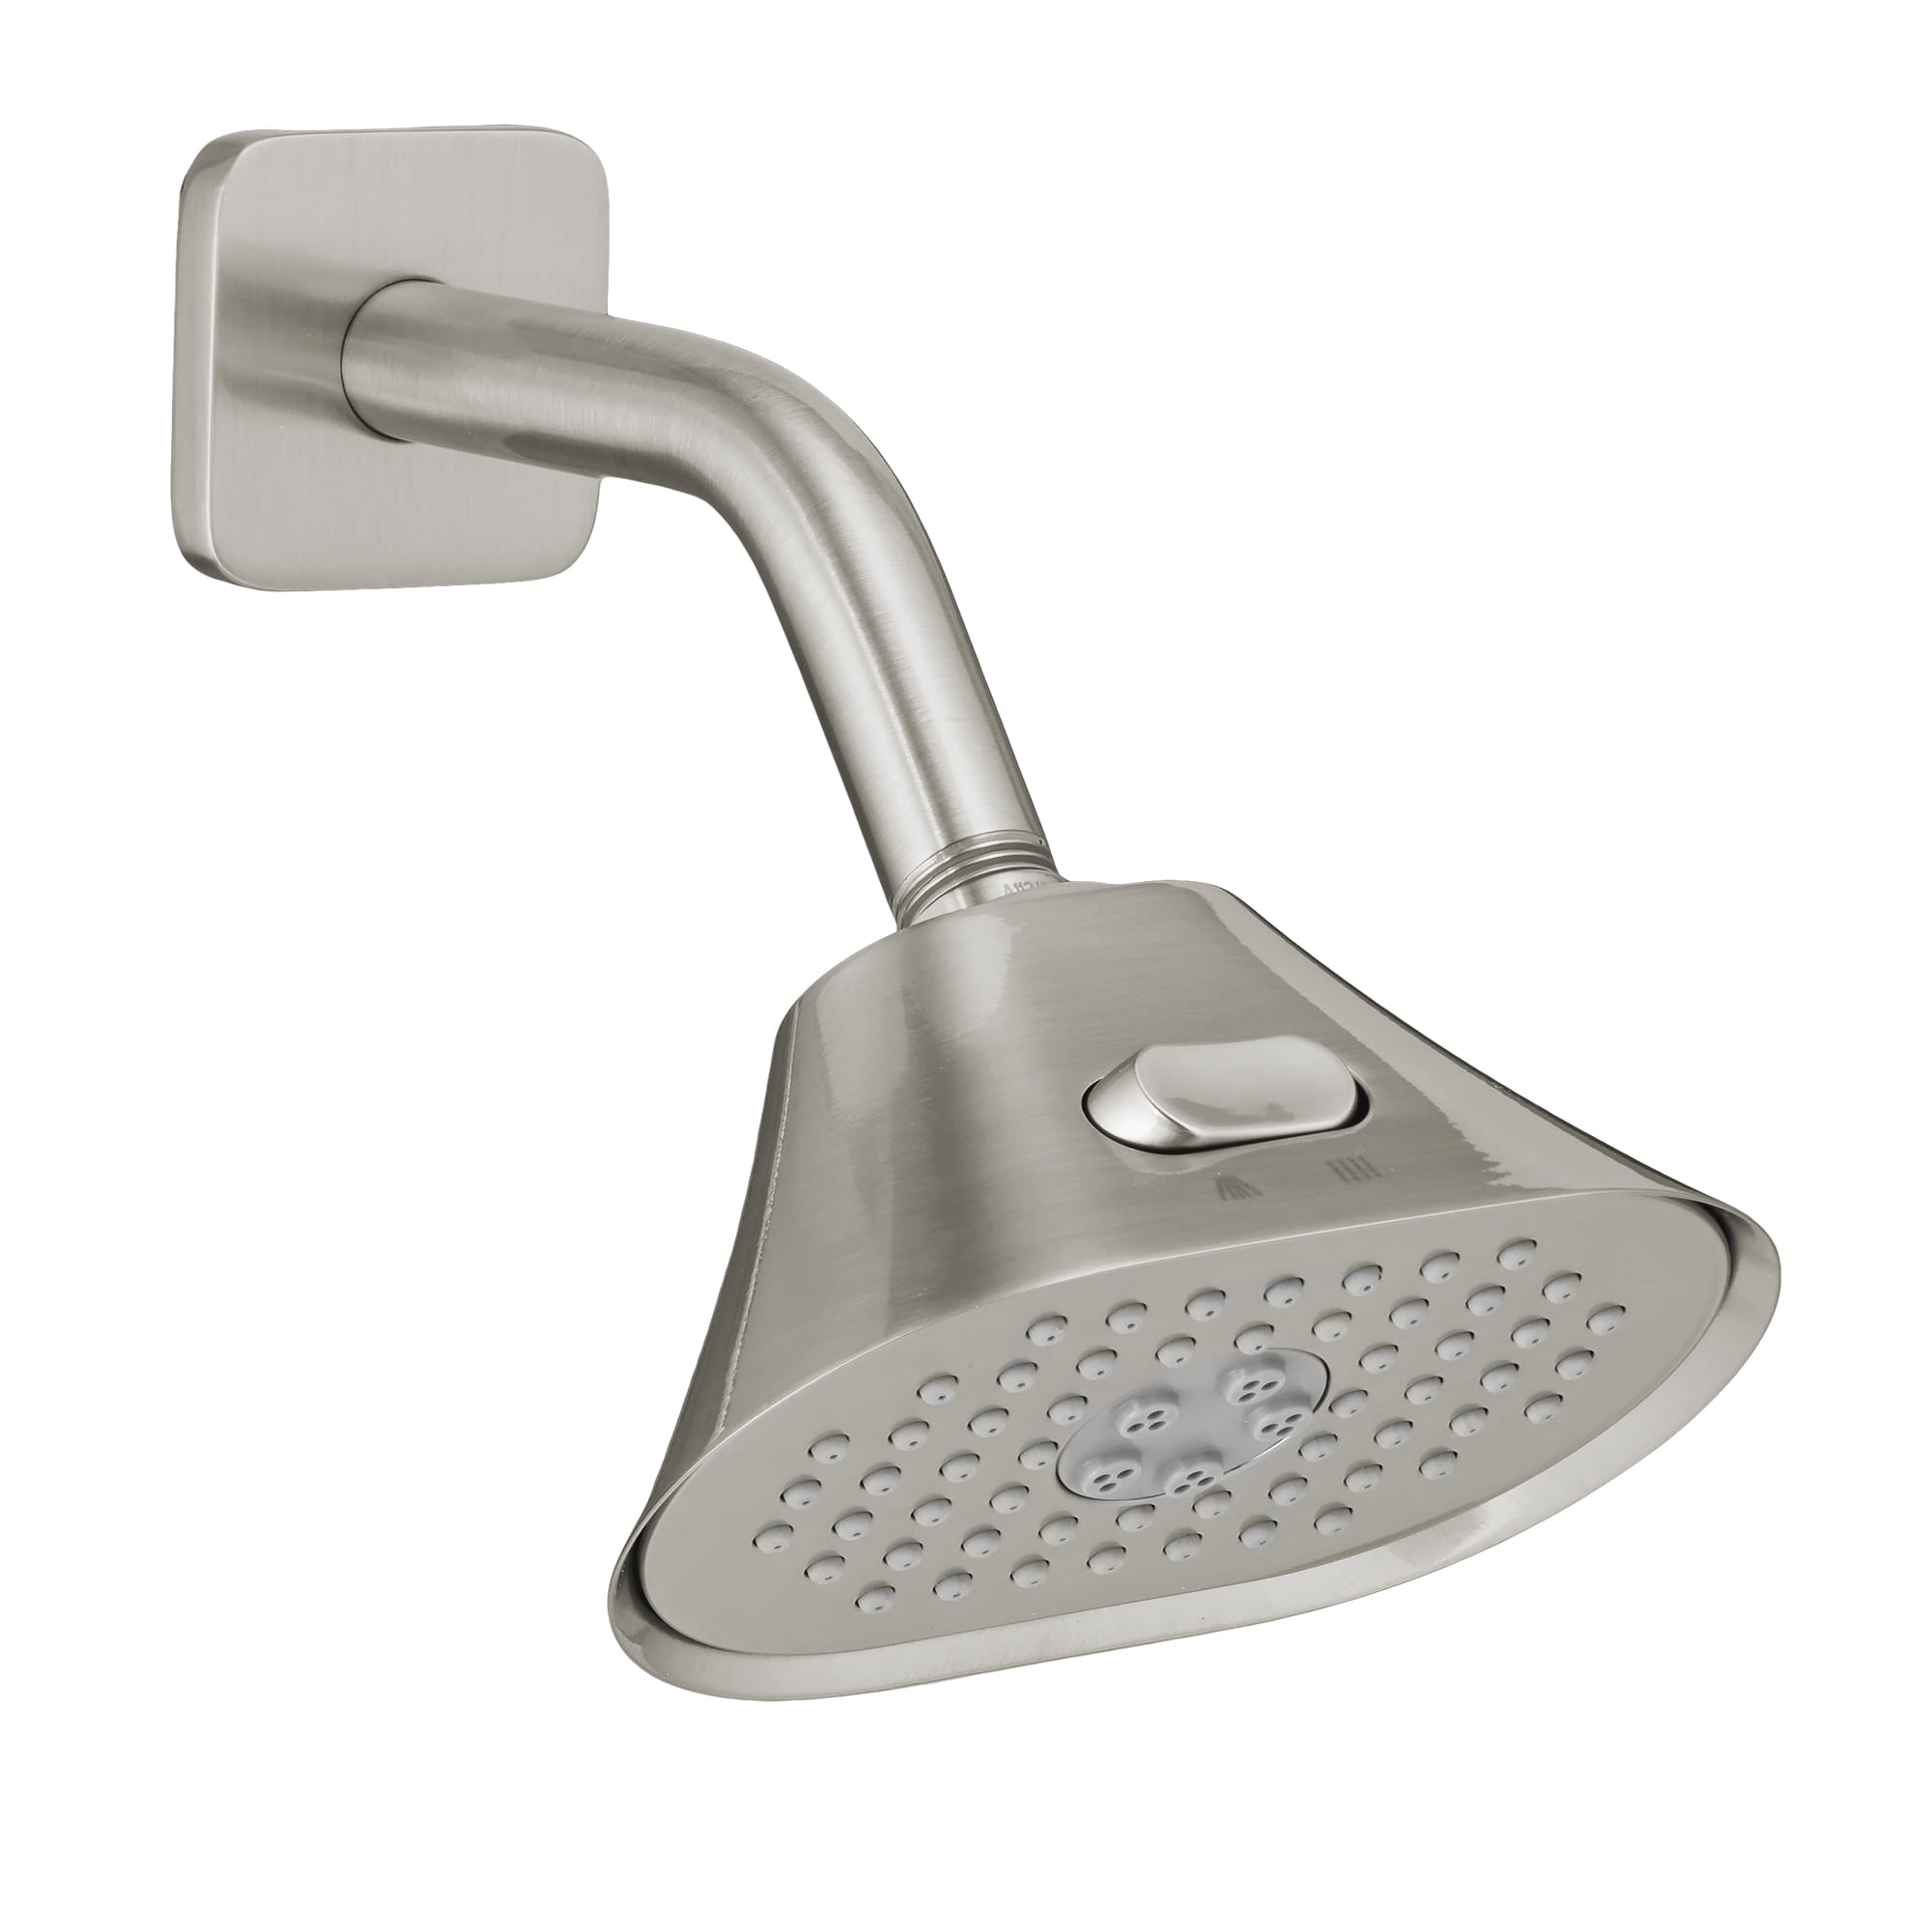 Equility Mulifunction Showerhead